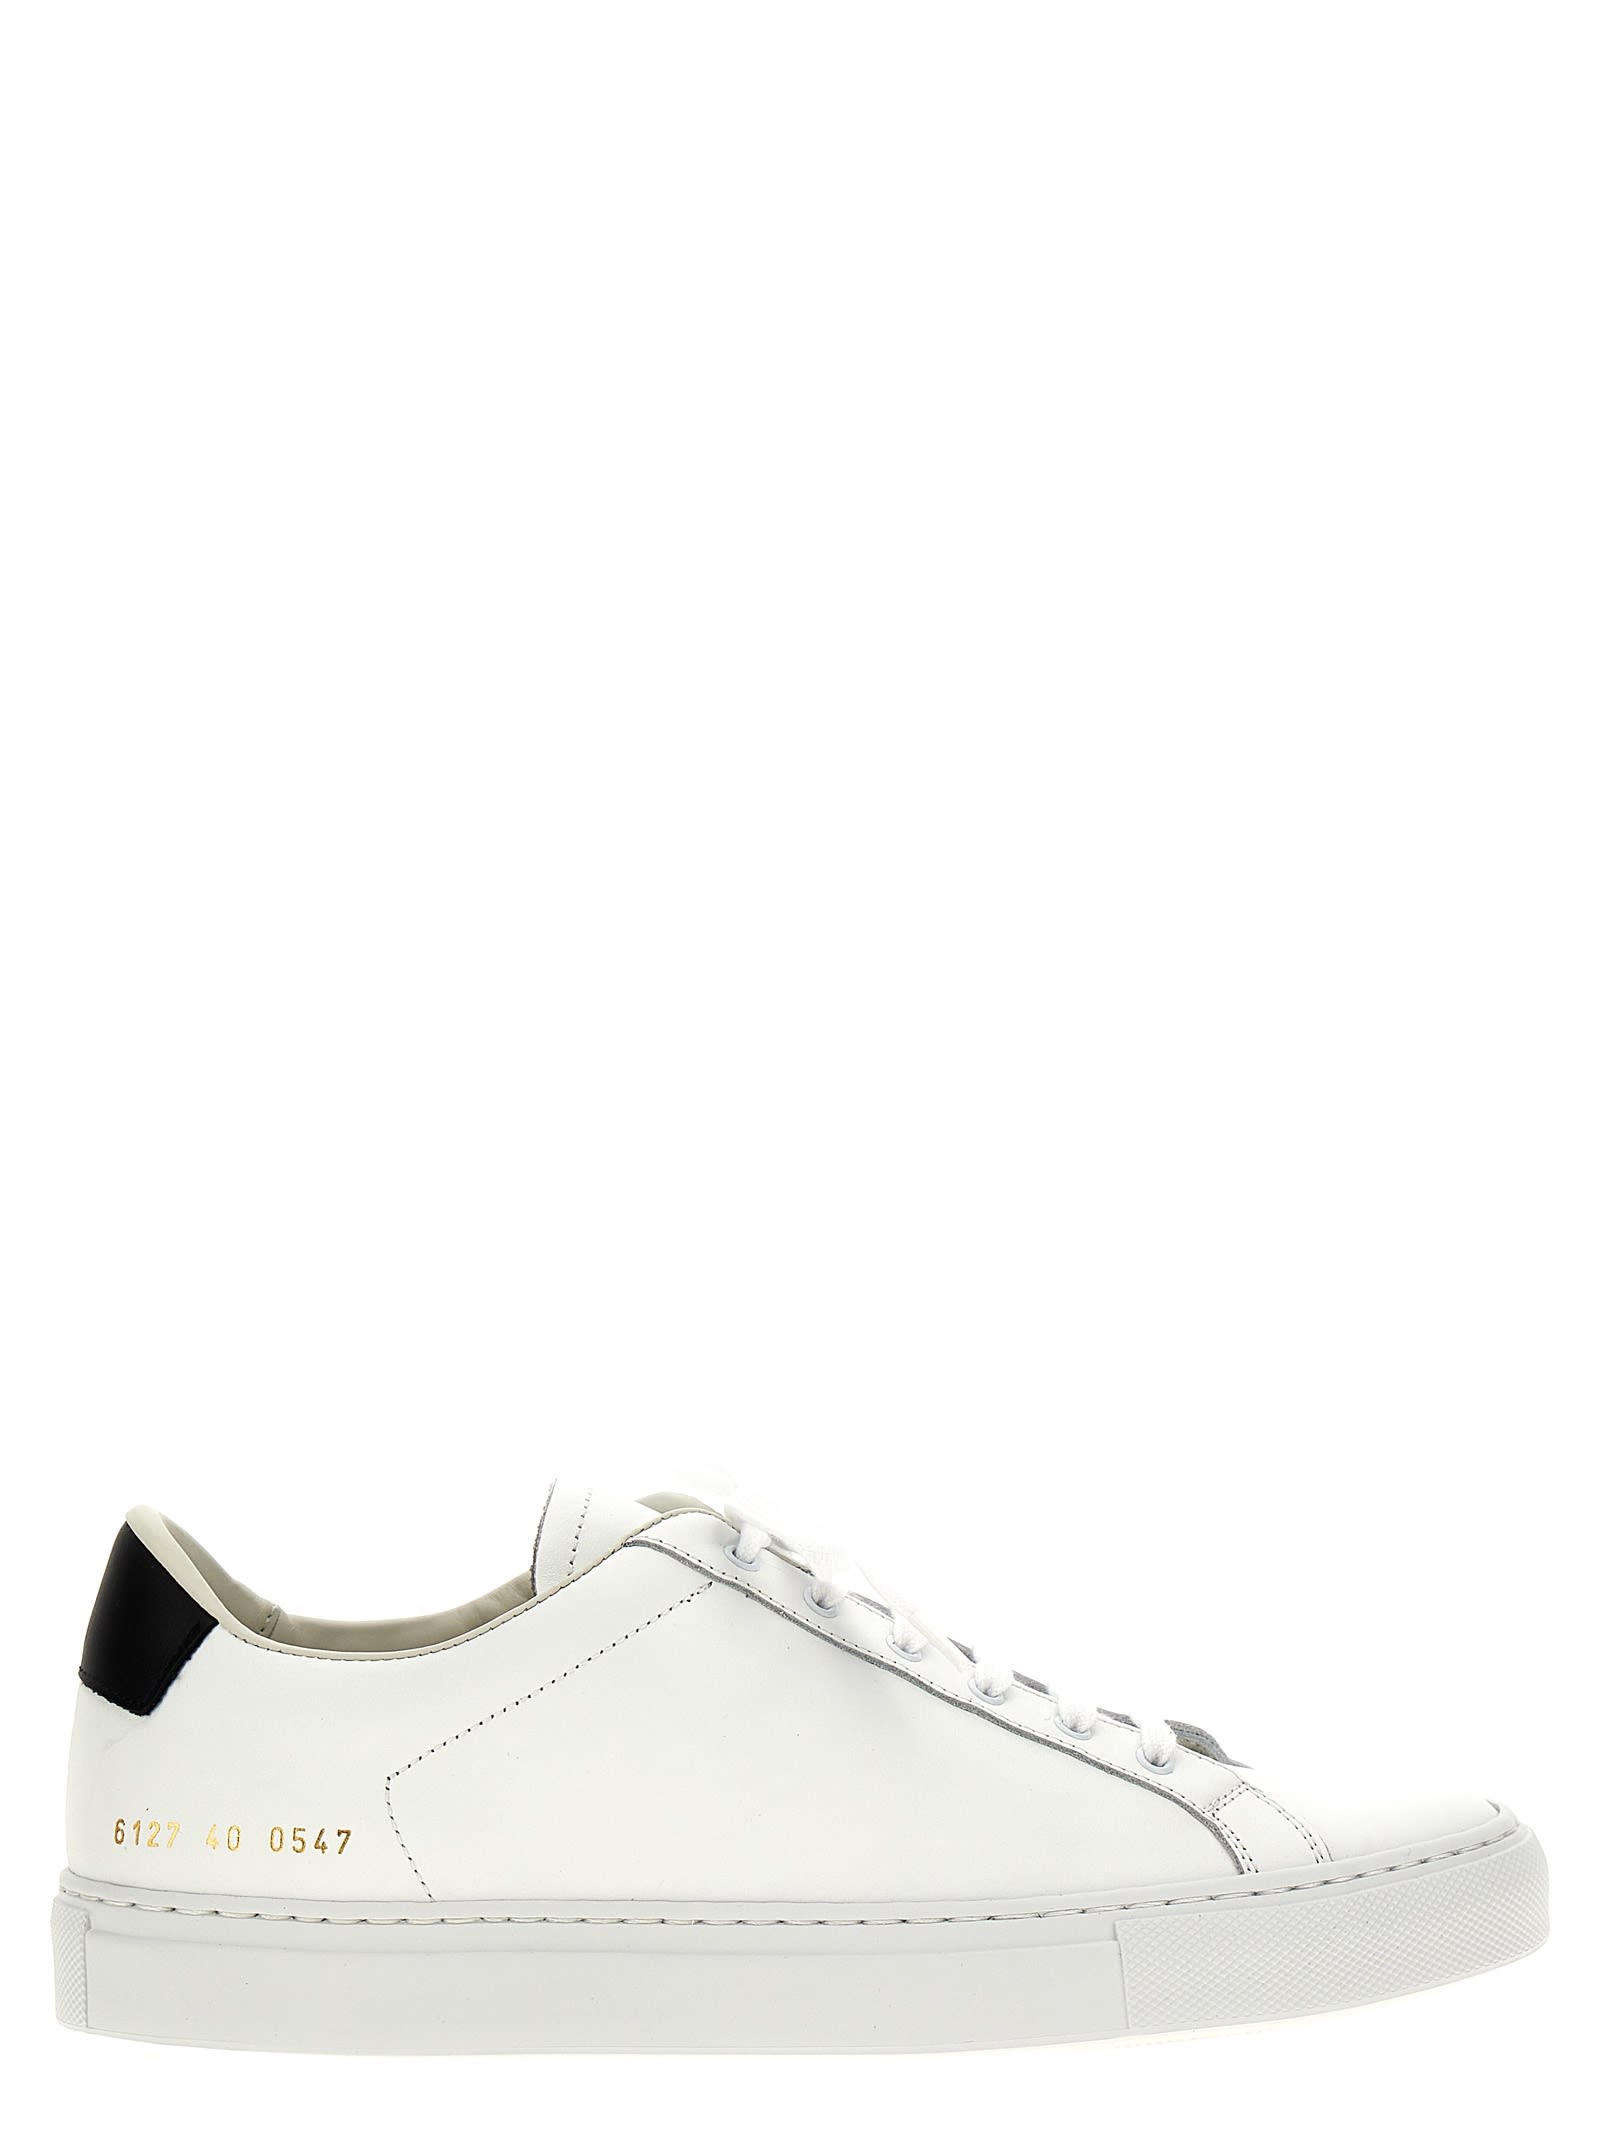 COMMON PROJECTS RETRO CLASSIC SNEAKERS